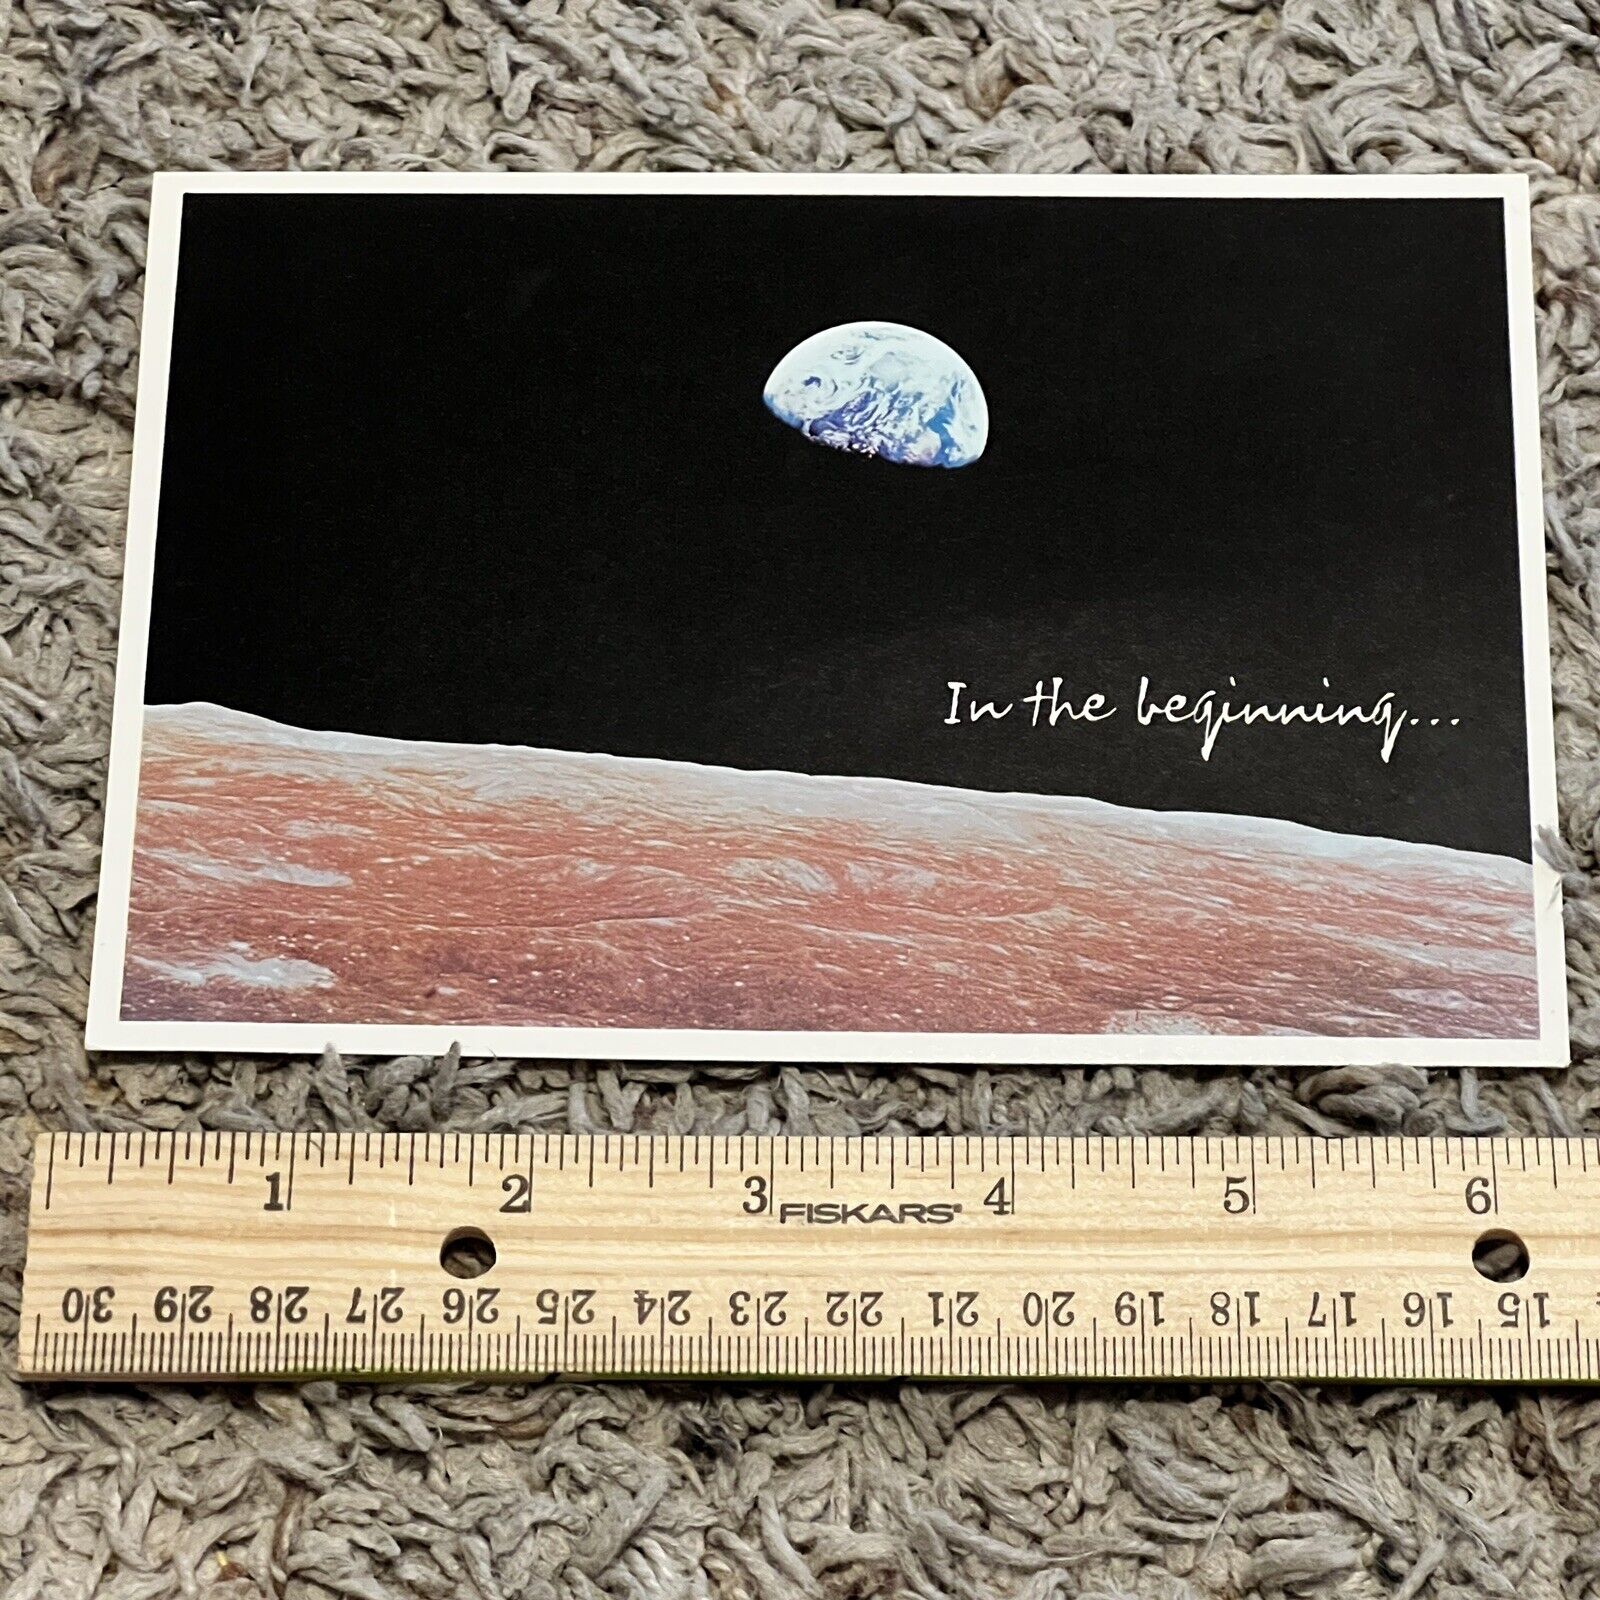 1968 EARTHRISE FROM APOLLO 8 CHRISTMAS EVE IN THE BEGINNING GREETINGS CARD